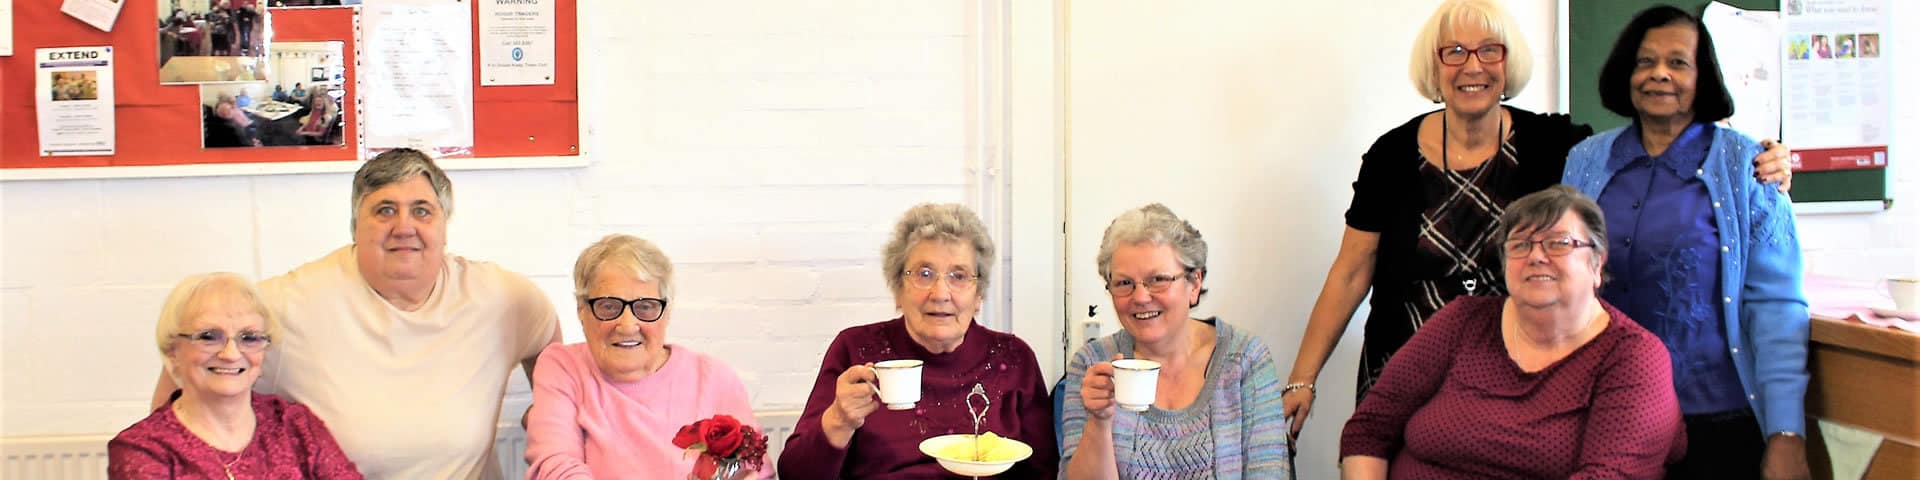 St Martin's Social Care Project